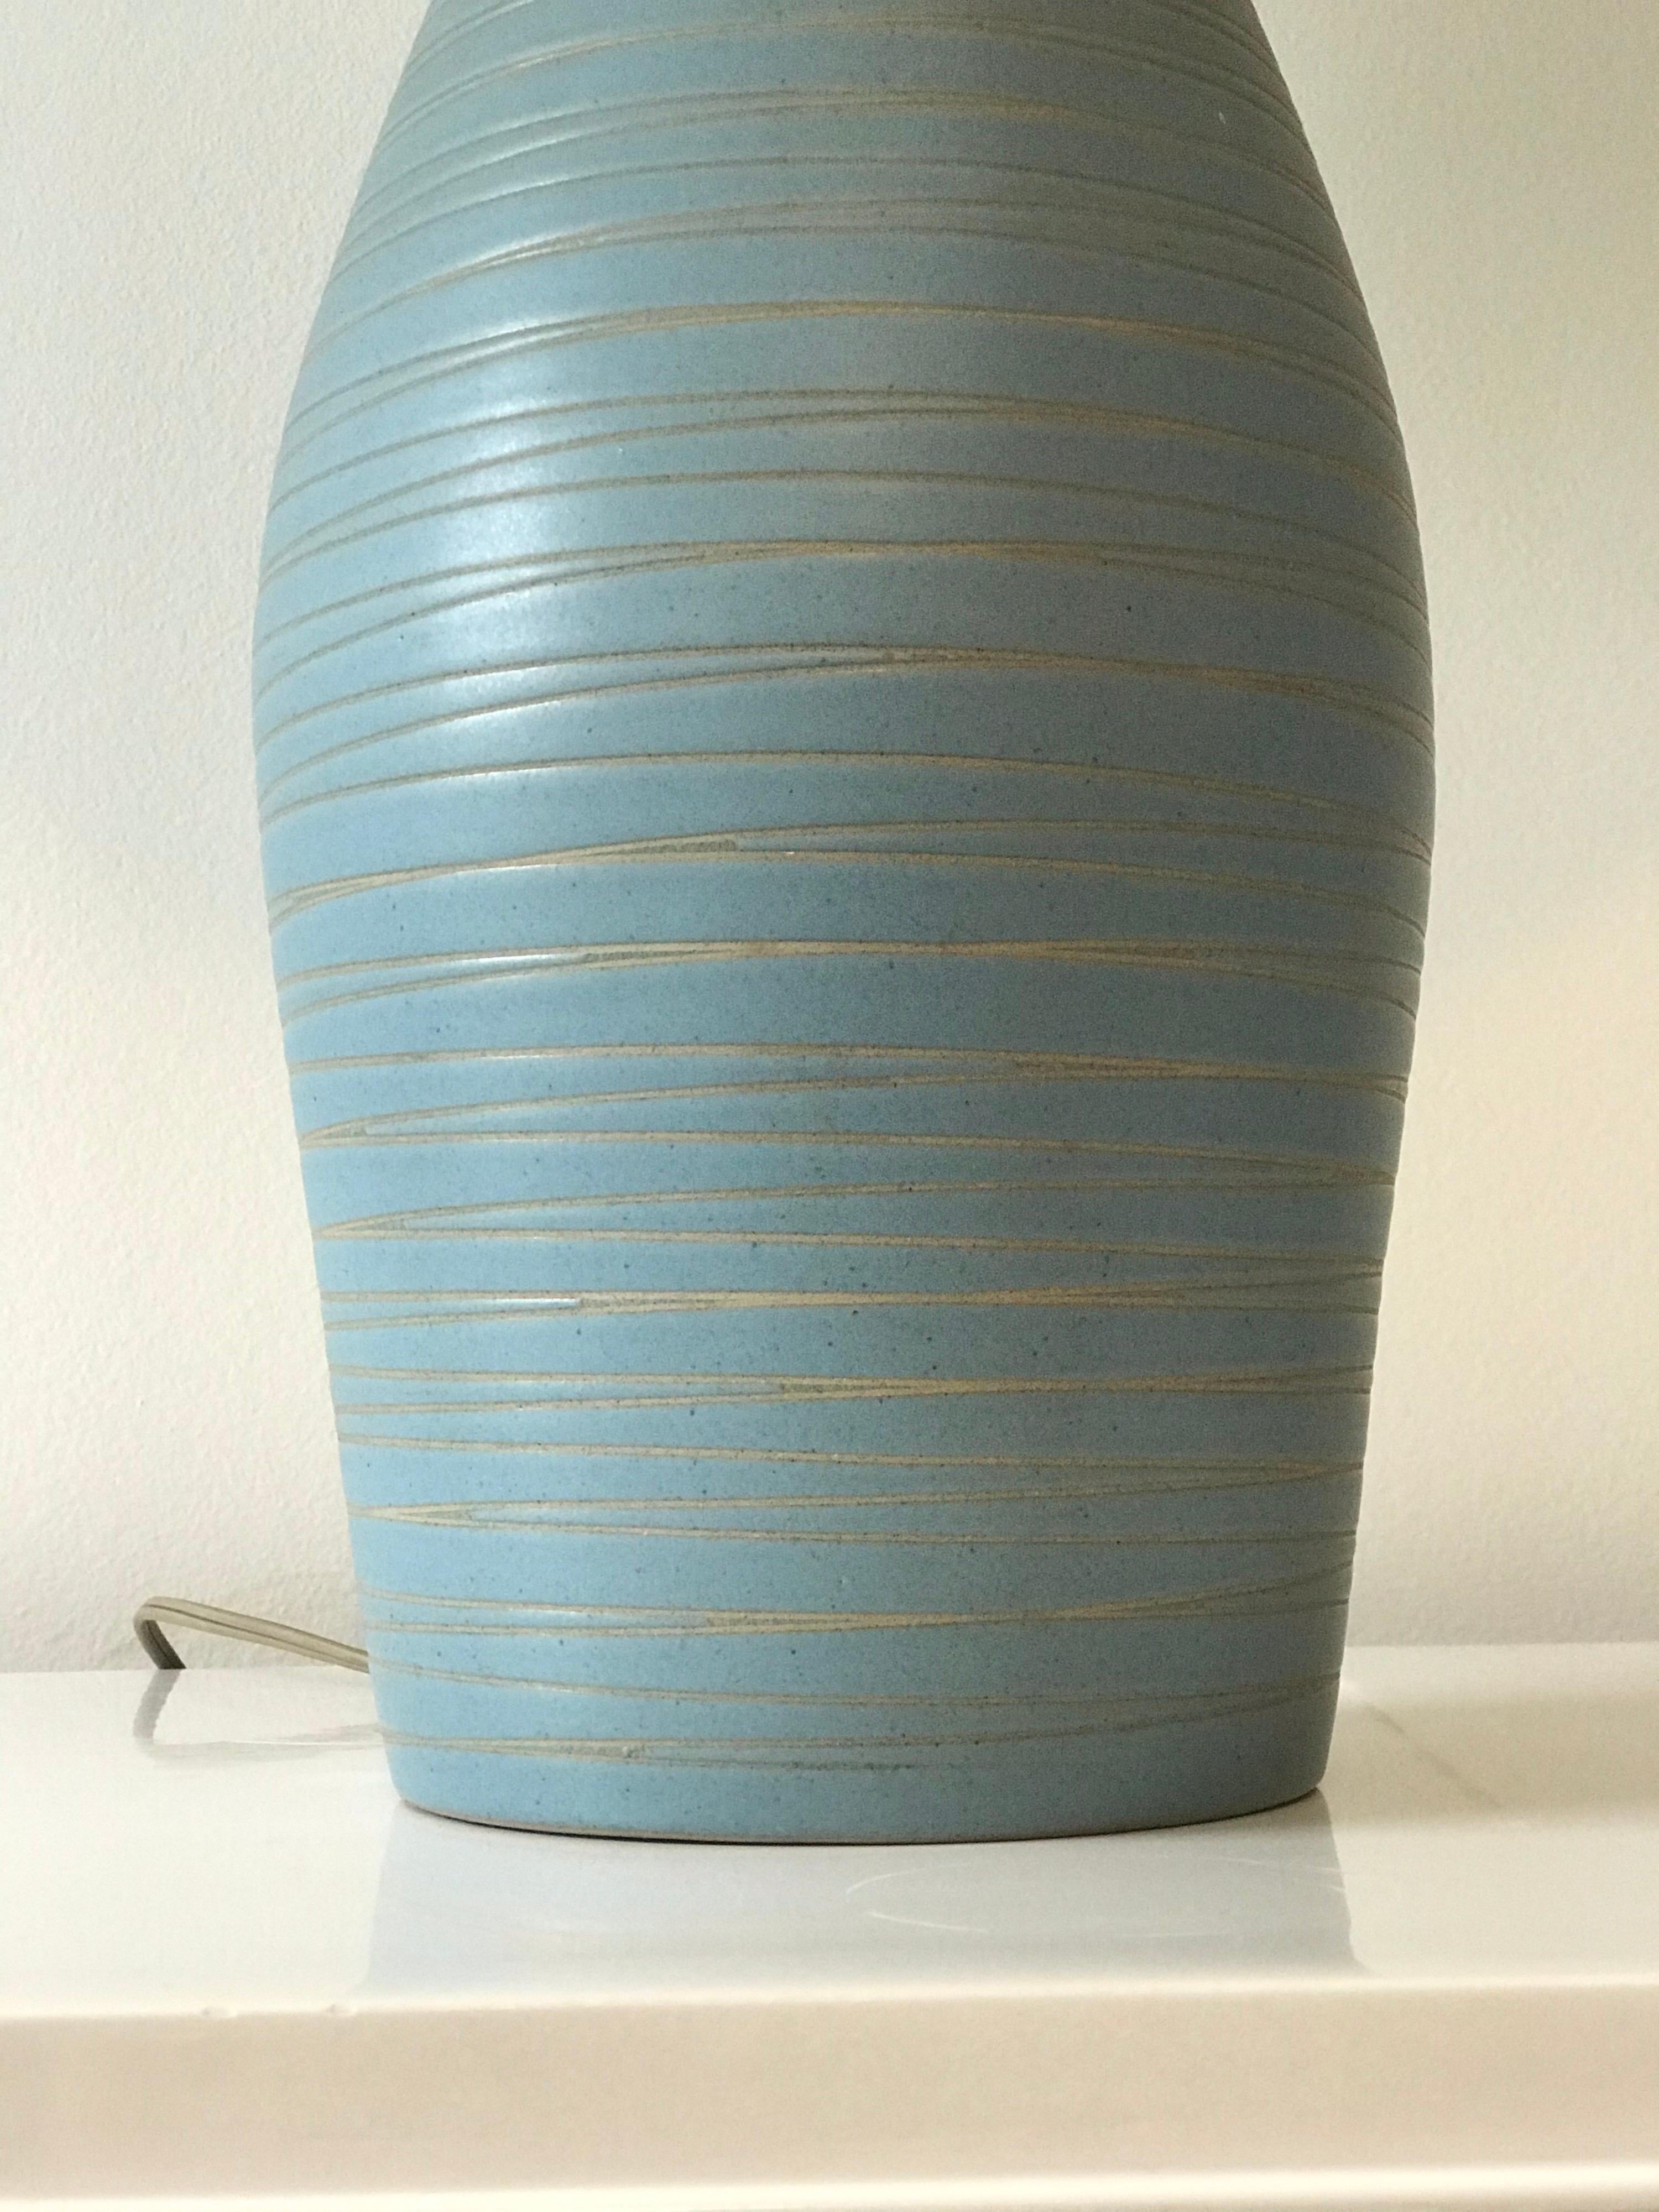 Stunning robin's egg blue lamp with incised detail by ceramicist duo Jane and Gordon Martz. Beautiful form and color with signature wood neck and finial.

Measures: Overall height 27